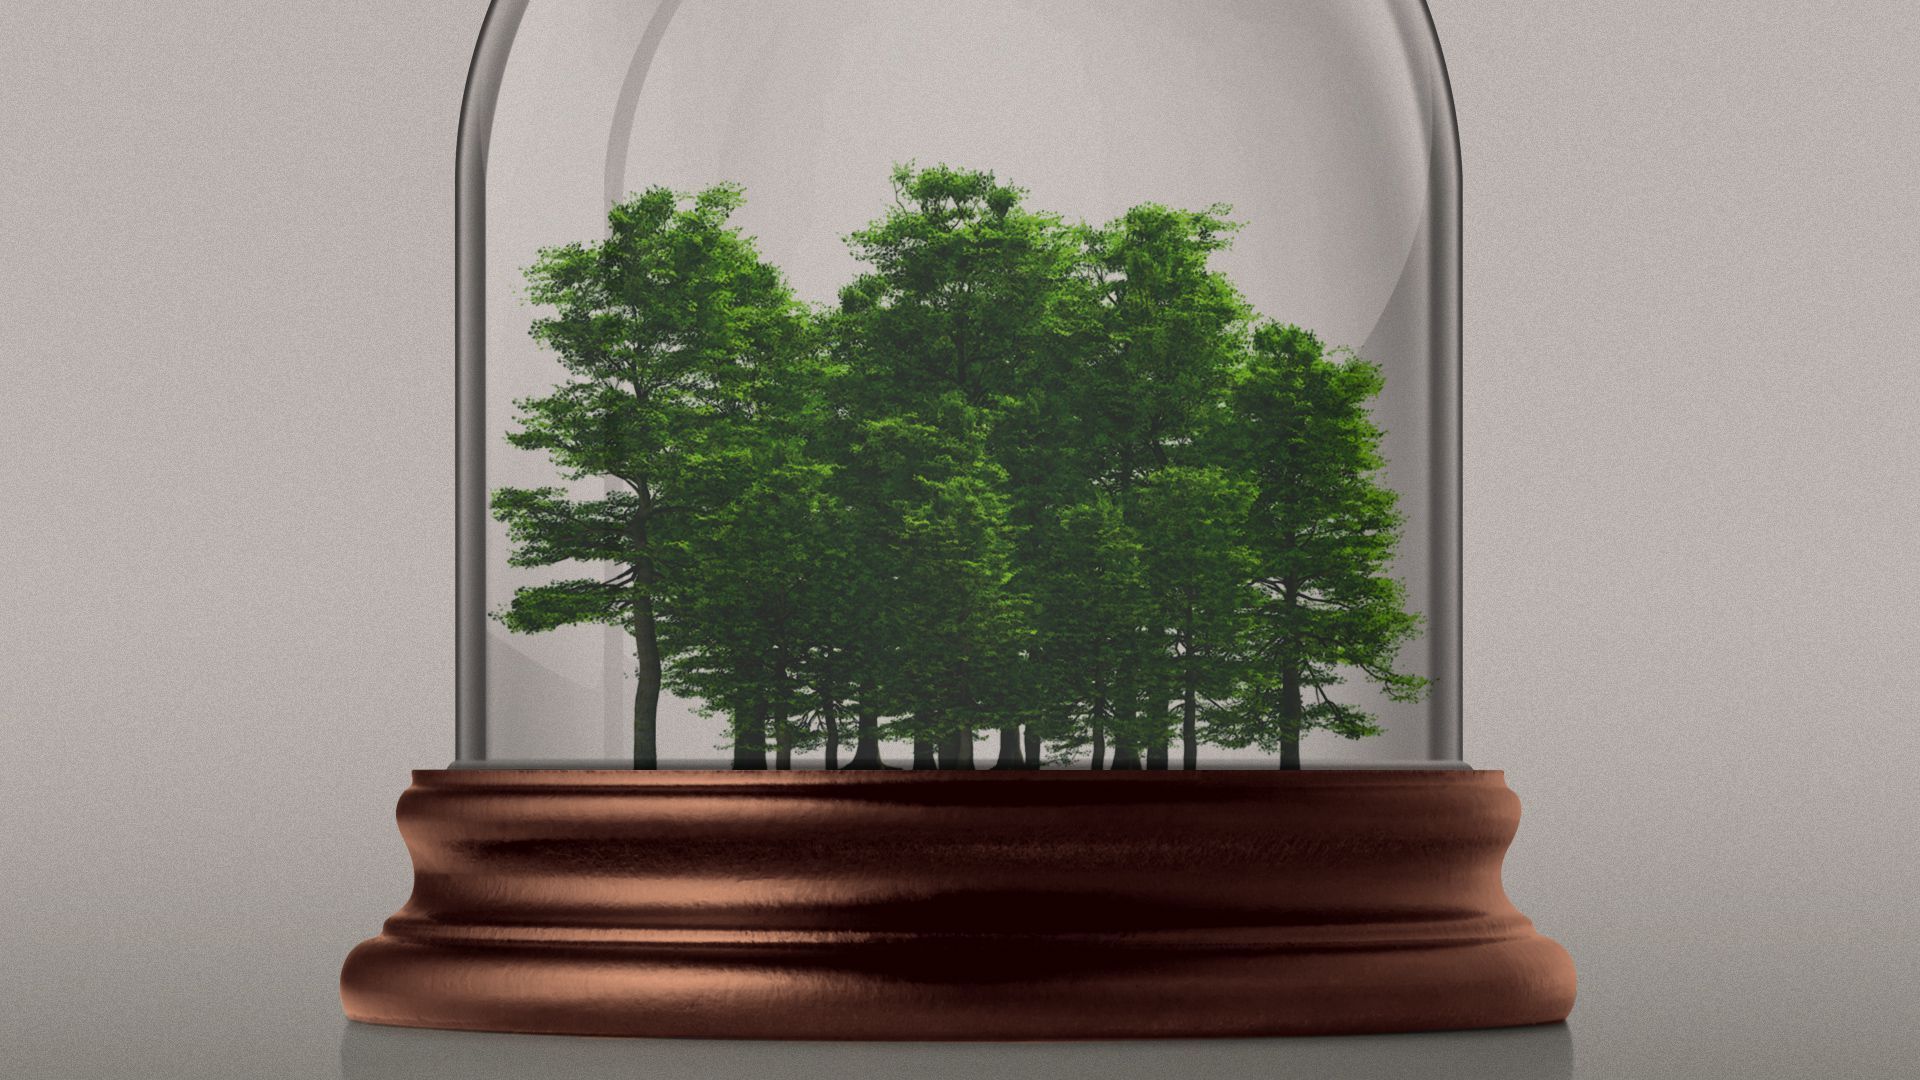 Illustration of trees in a bell jar